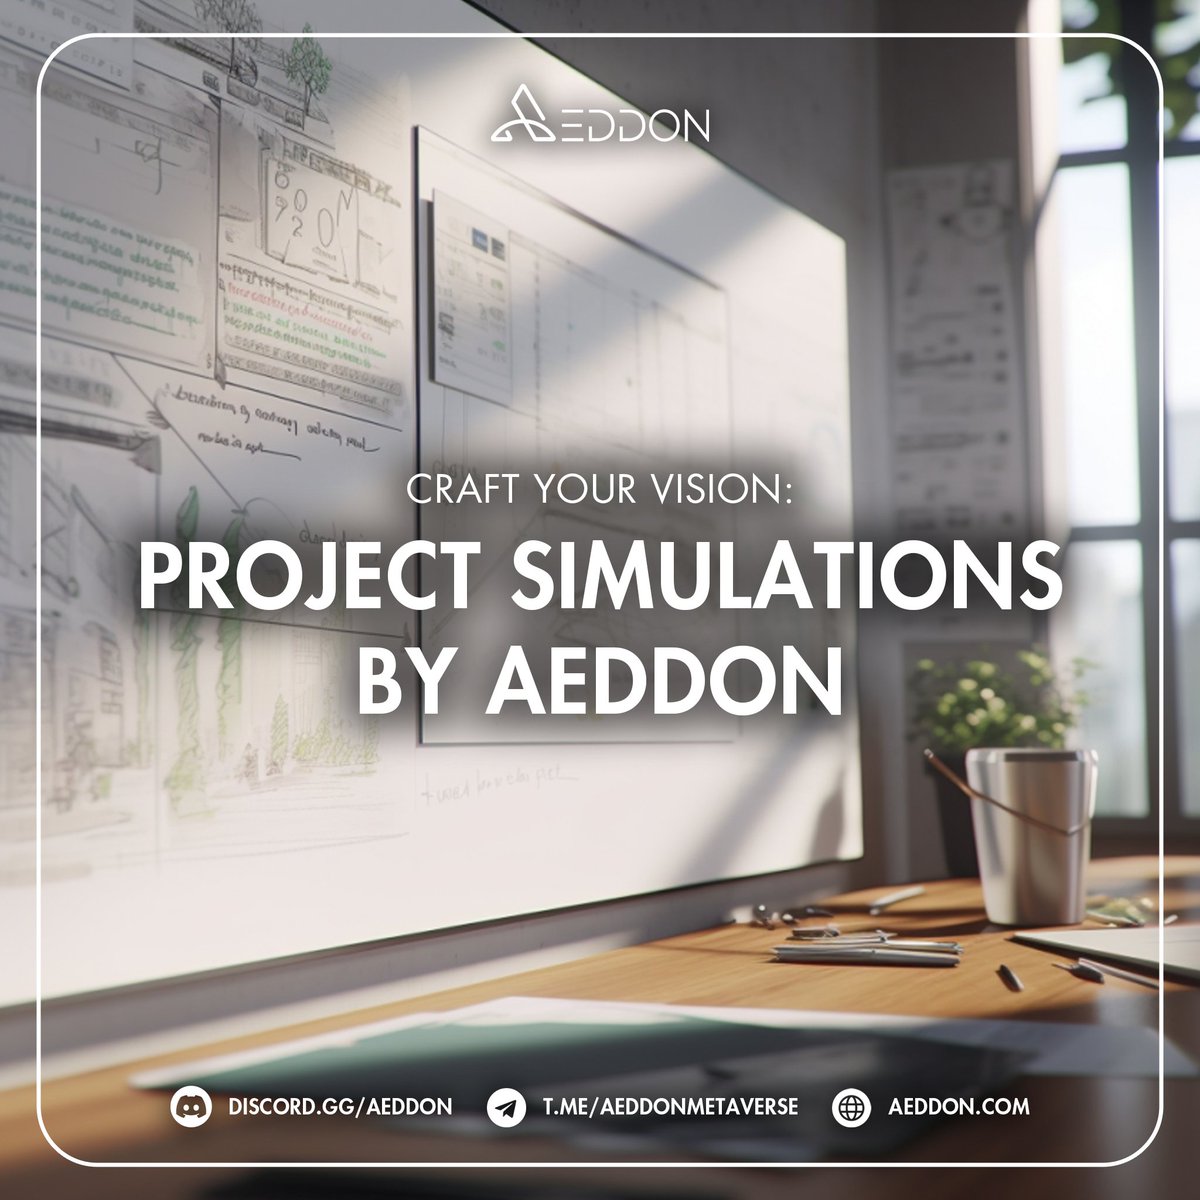 Unlock the power of your imagination with Aeddon Metaverse's Project Simulations.
Craft your vision and bring it to life in the most immersive and realistic way imaginable.
#AeddonMetaverse #ProjectSimulations #CraftYourVision